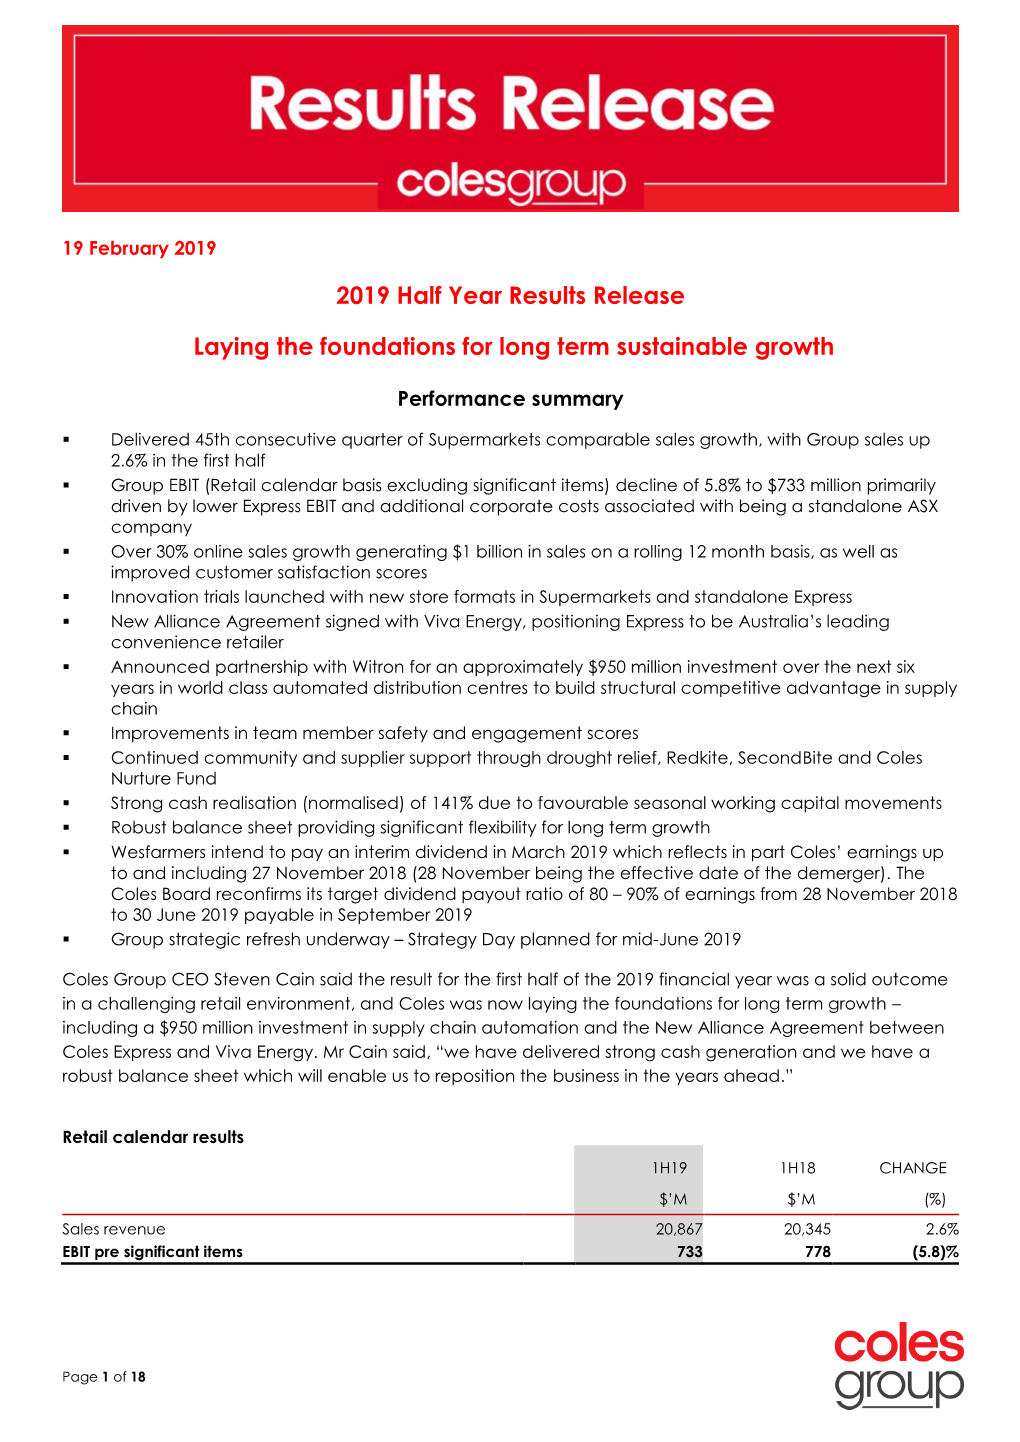 2019 Half Year Results Release Laying the Foundations for Long Term